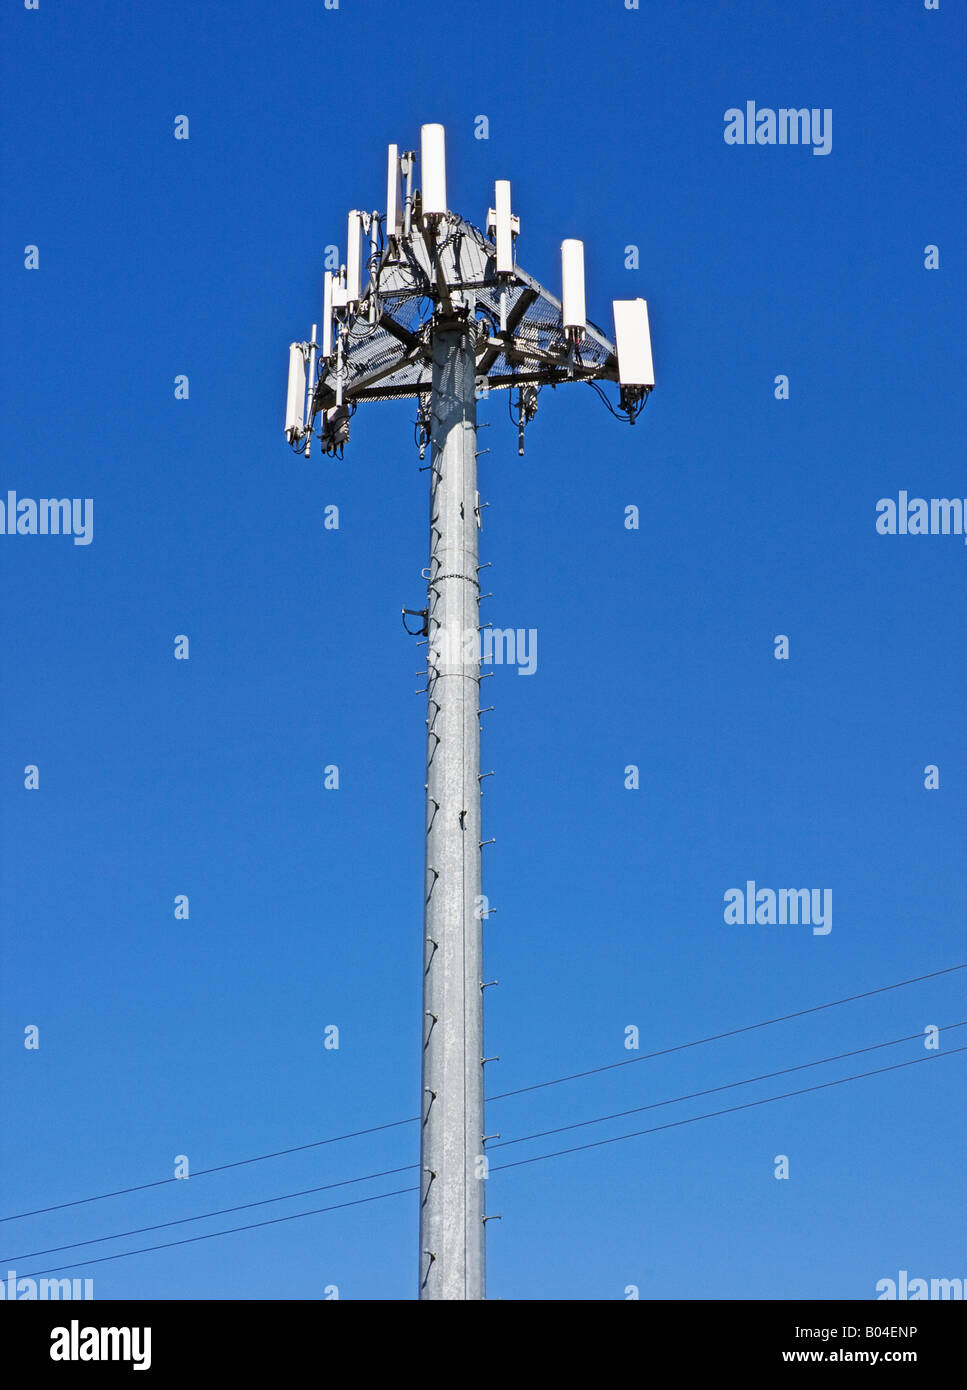 Cellular base station network antenna, air pollution and